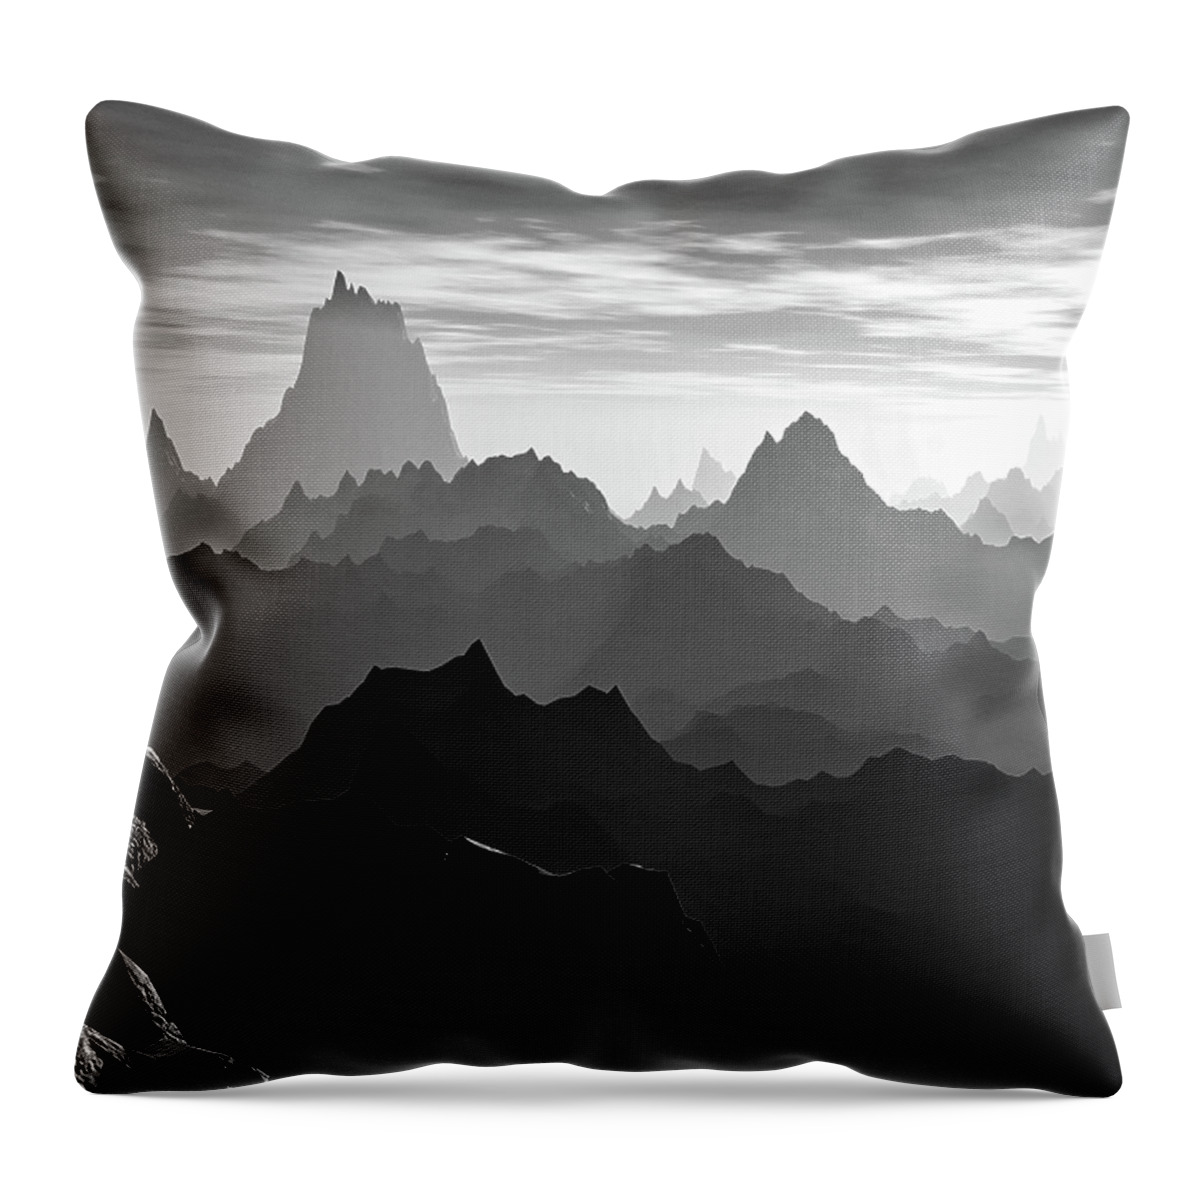 Travel Throw Pillow featuring the digital art A Long Hike by Phil Perkins